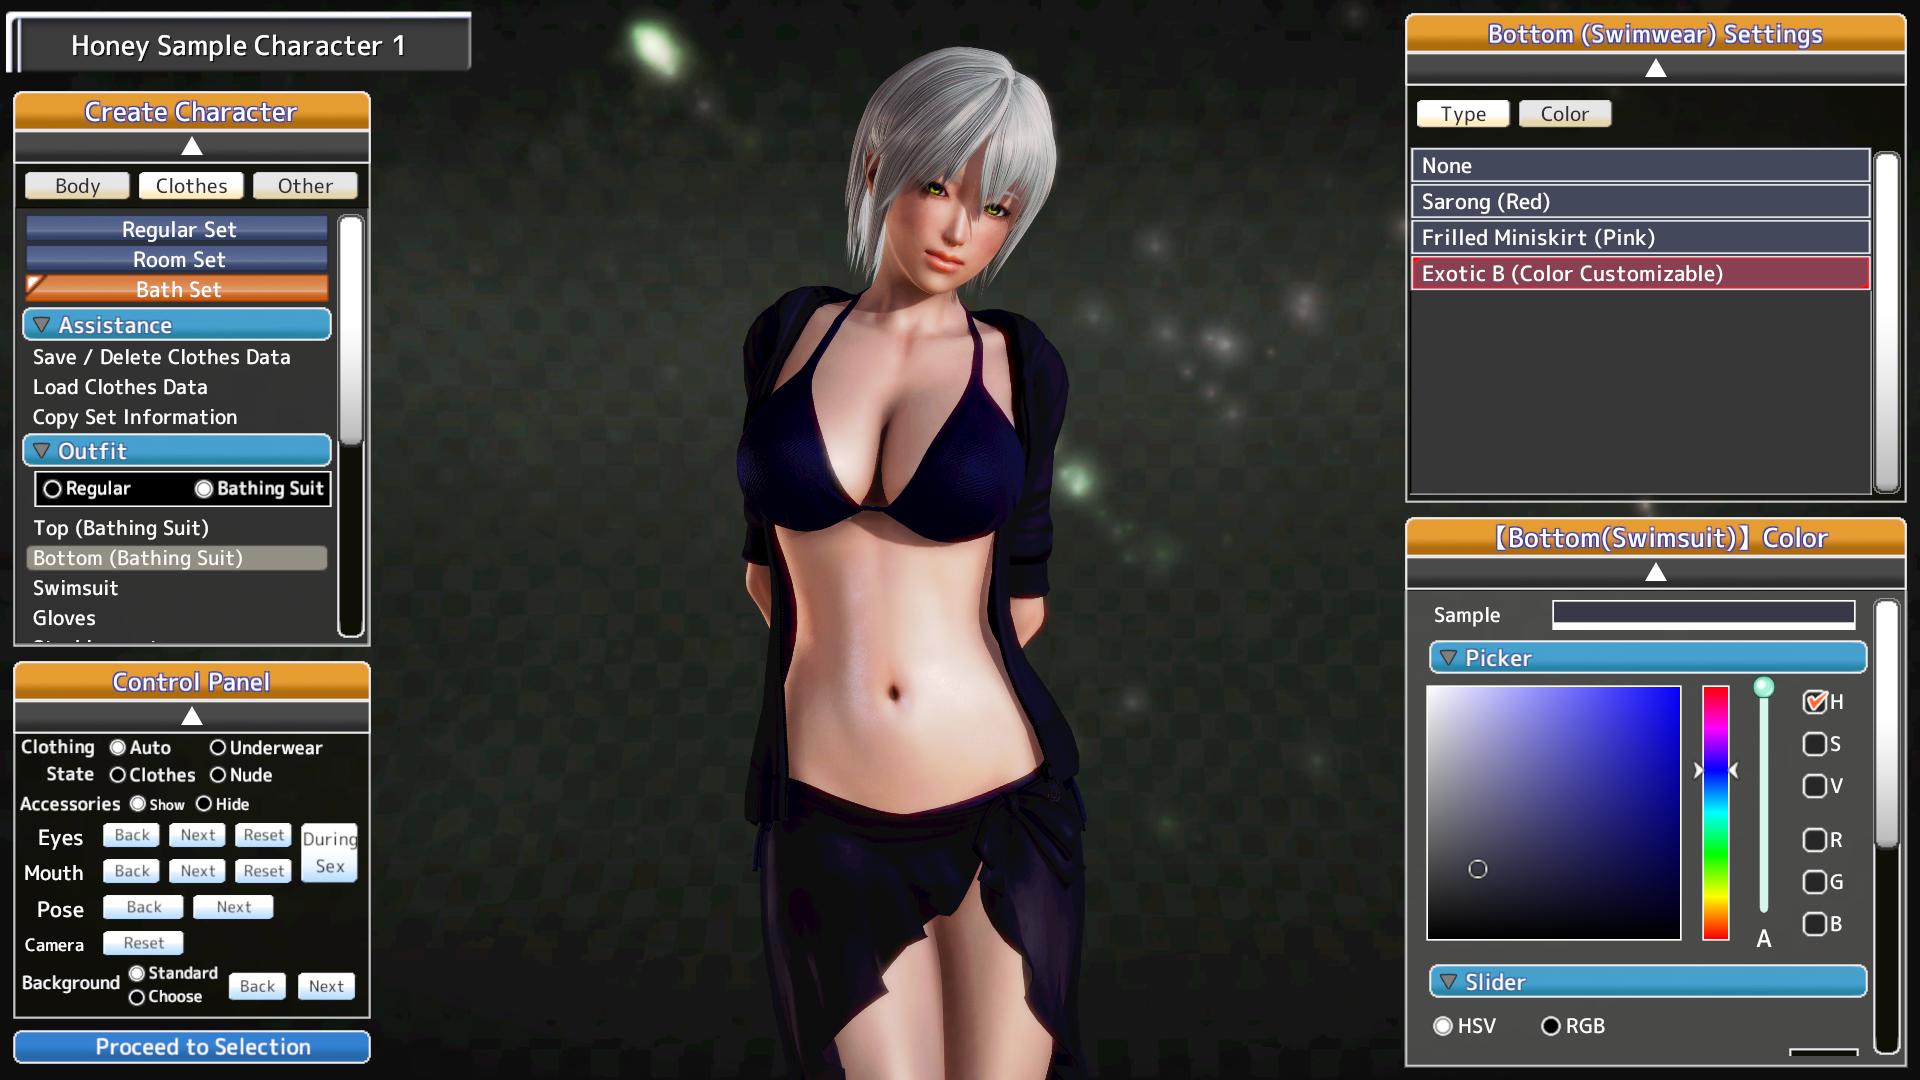 “@FAKKU The character creator is awesome (and a bit overwhelming at times)